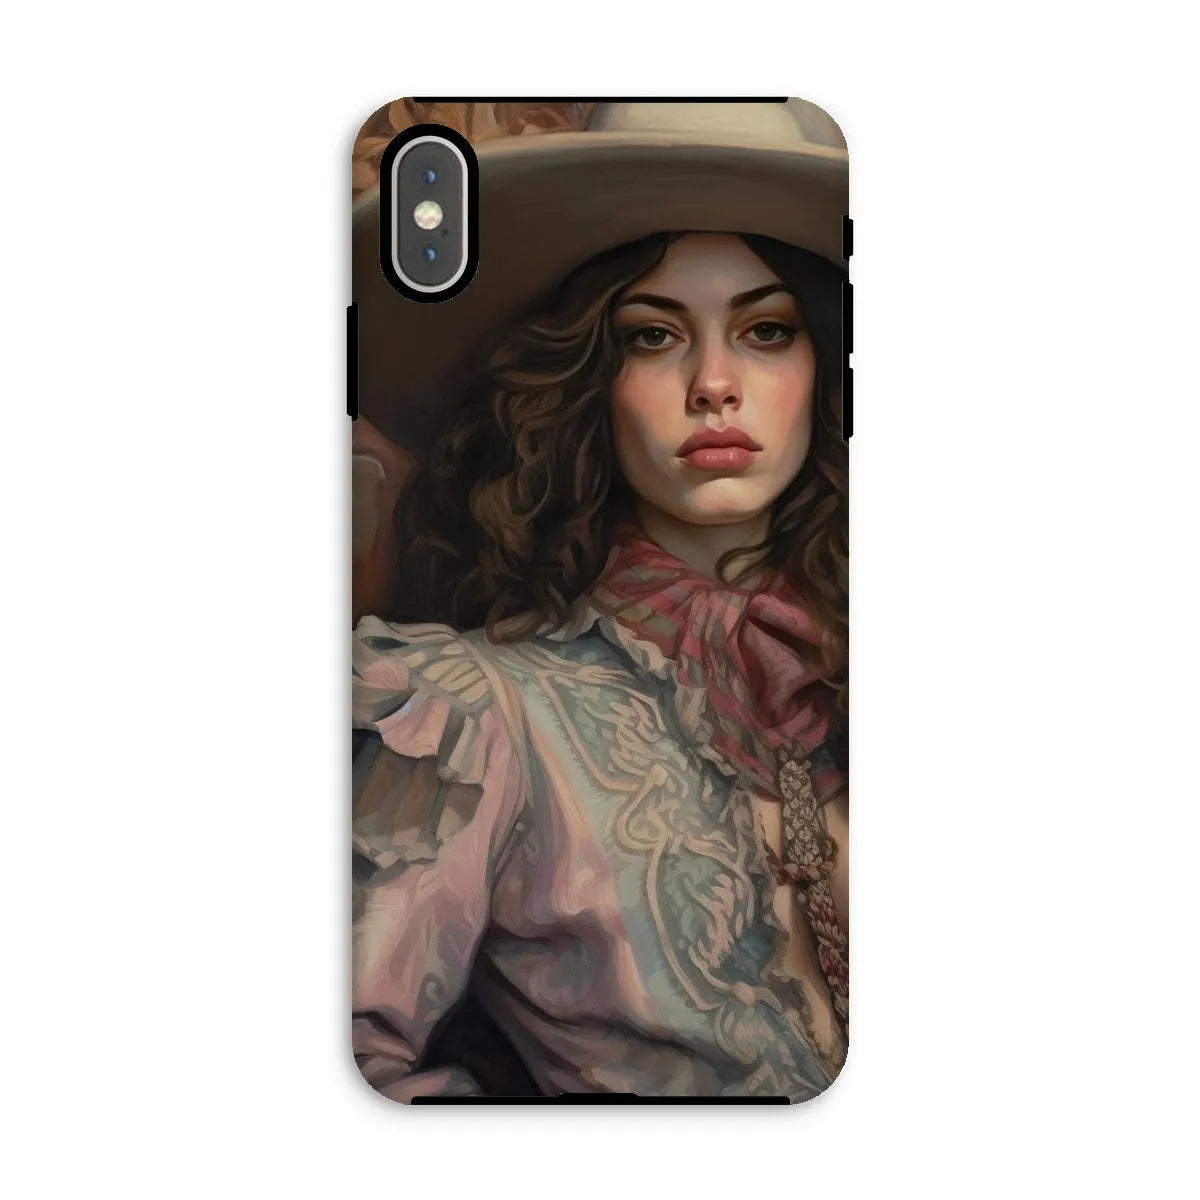 Alex The Lesbian Cowgirl - Sapphic Art Phone Case - Iphone Xs Max / Matte - Mobile Phone Cases - Aesthetic Art